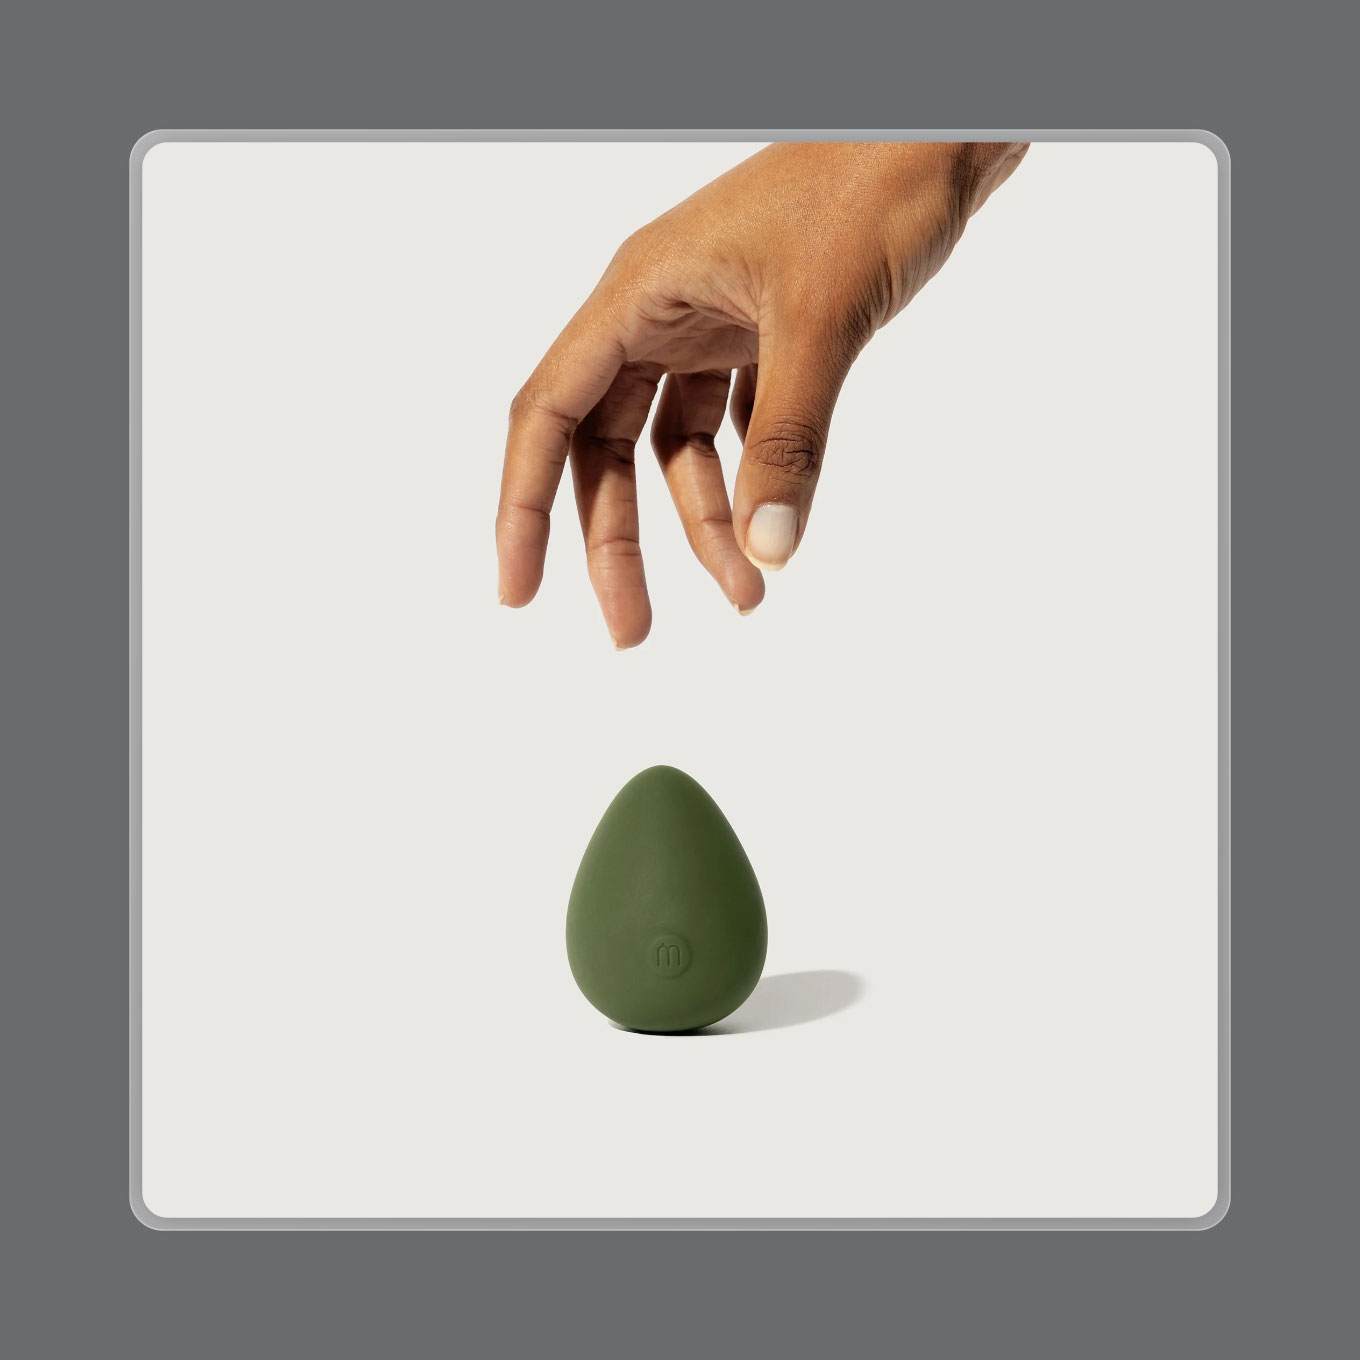 A hand reaches for a round, green sex toy